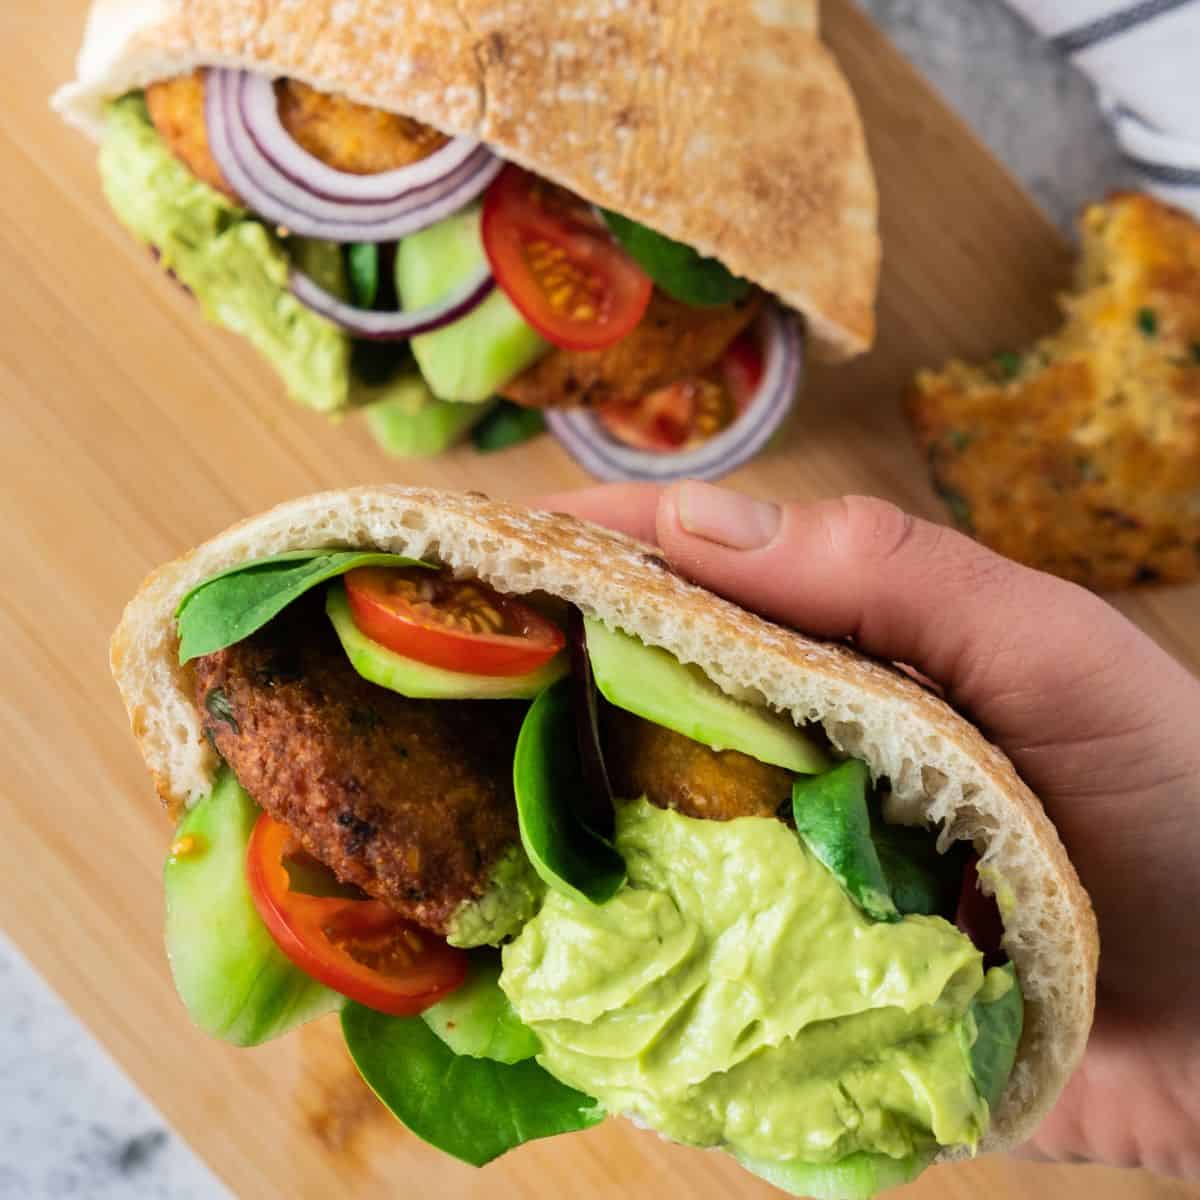 A pita bread filled with falafel balls, sliced tomatoes, red onions, and avocado cream.